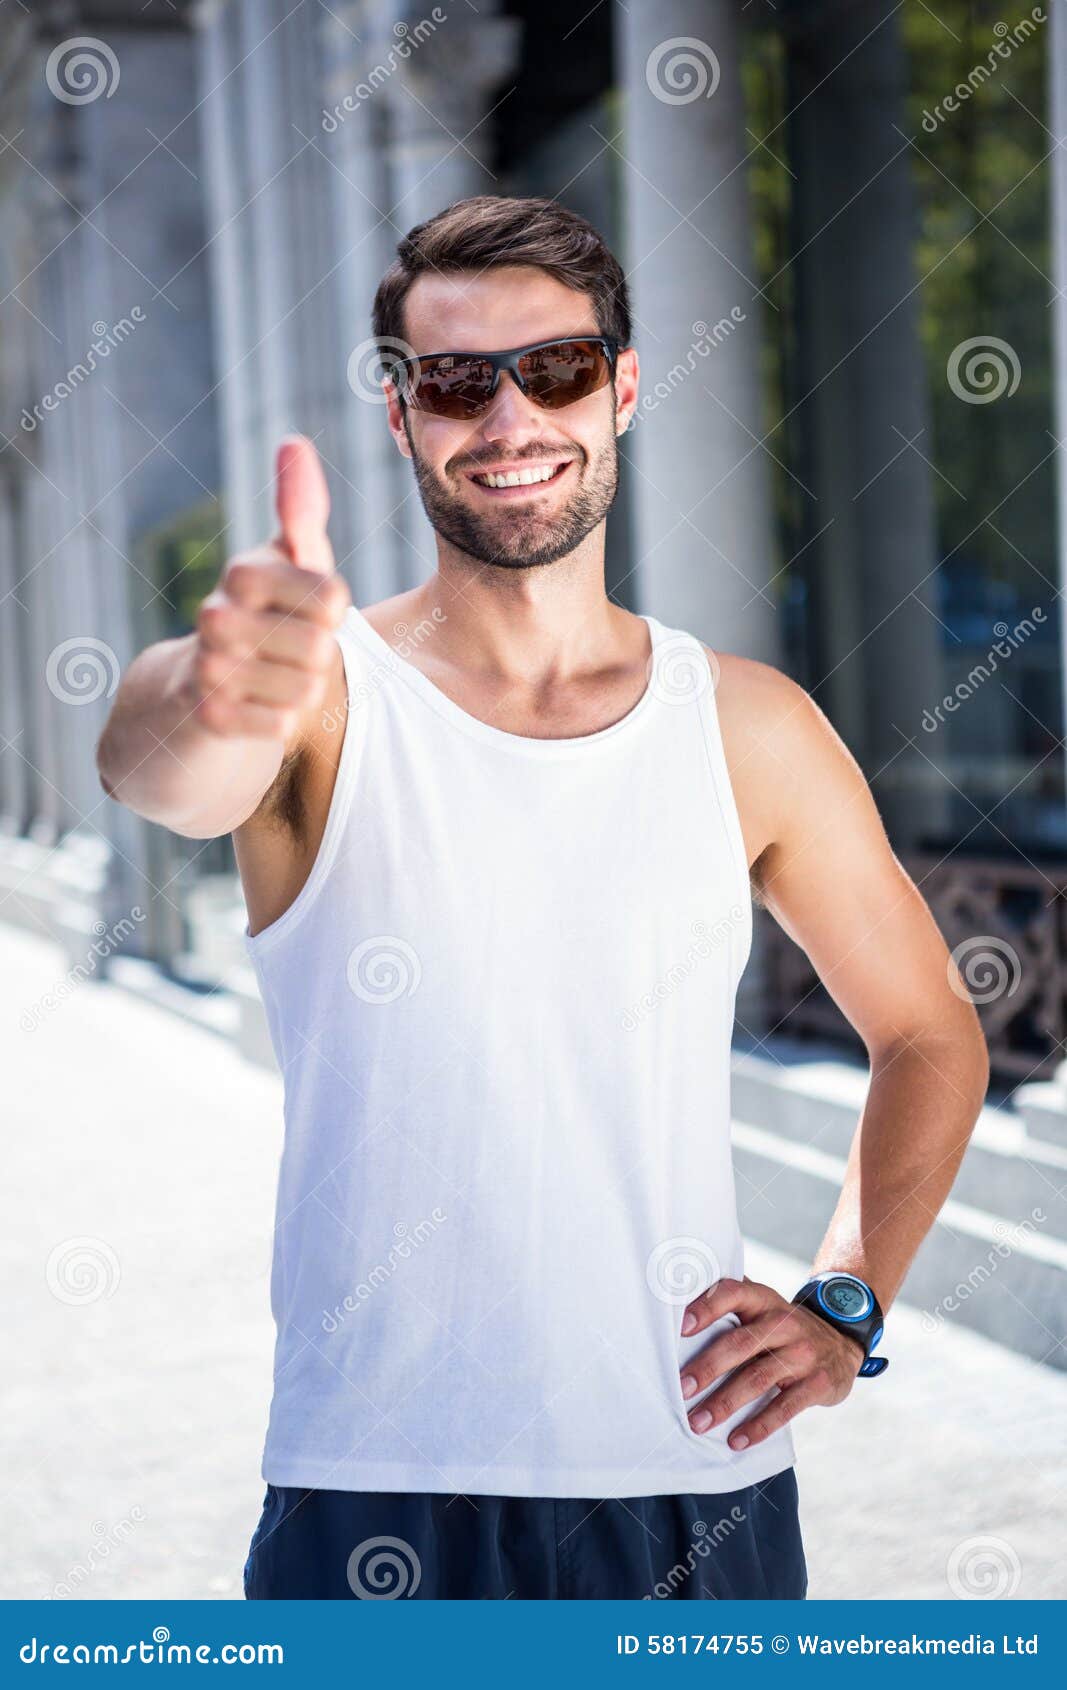 Smiling Handsome Athlete Doing Thumbs Up Stock Image - Image of city ...